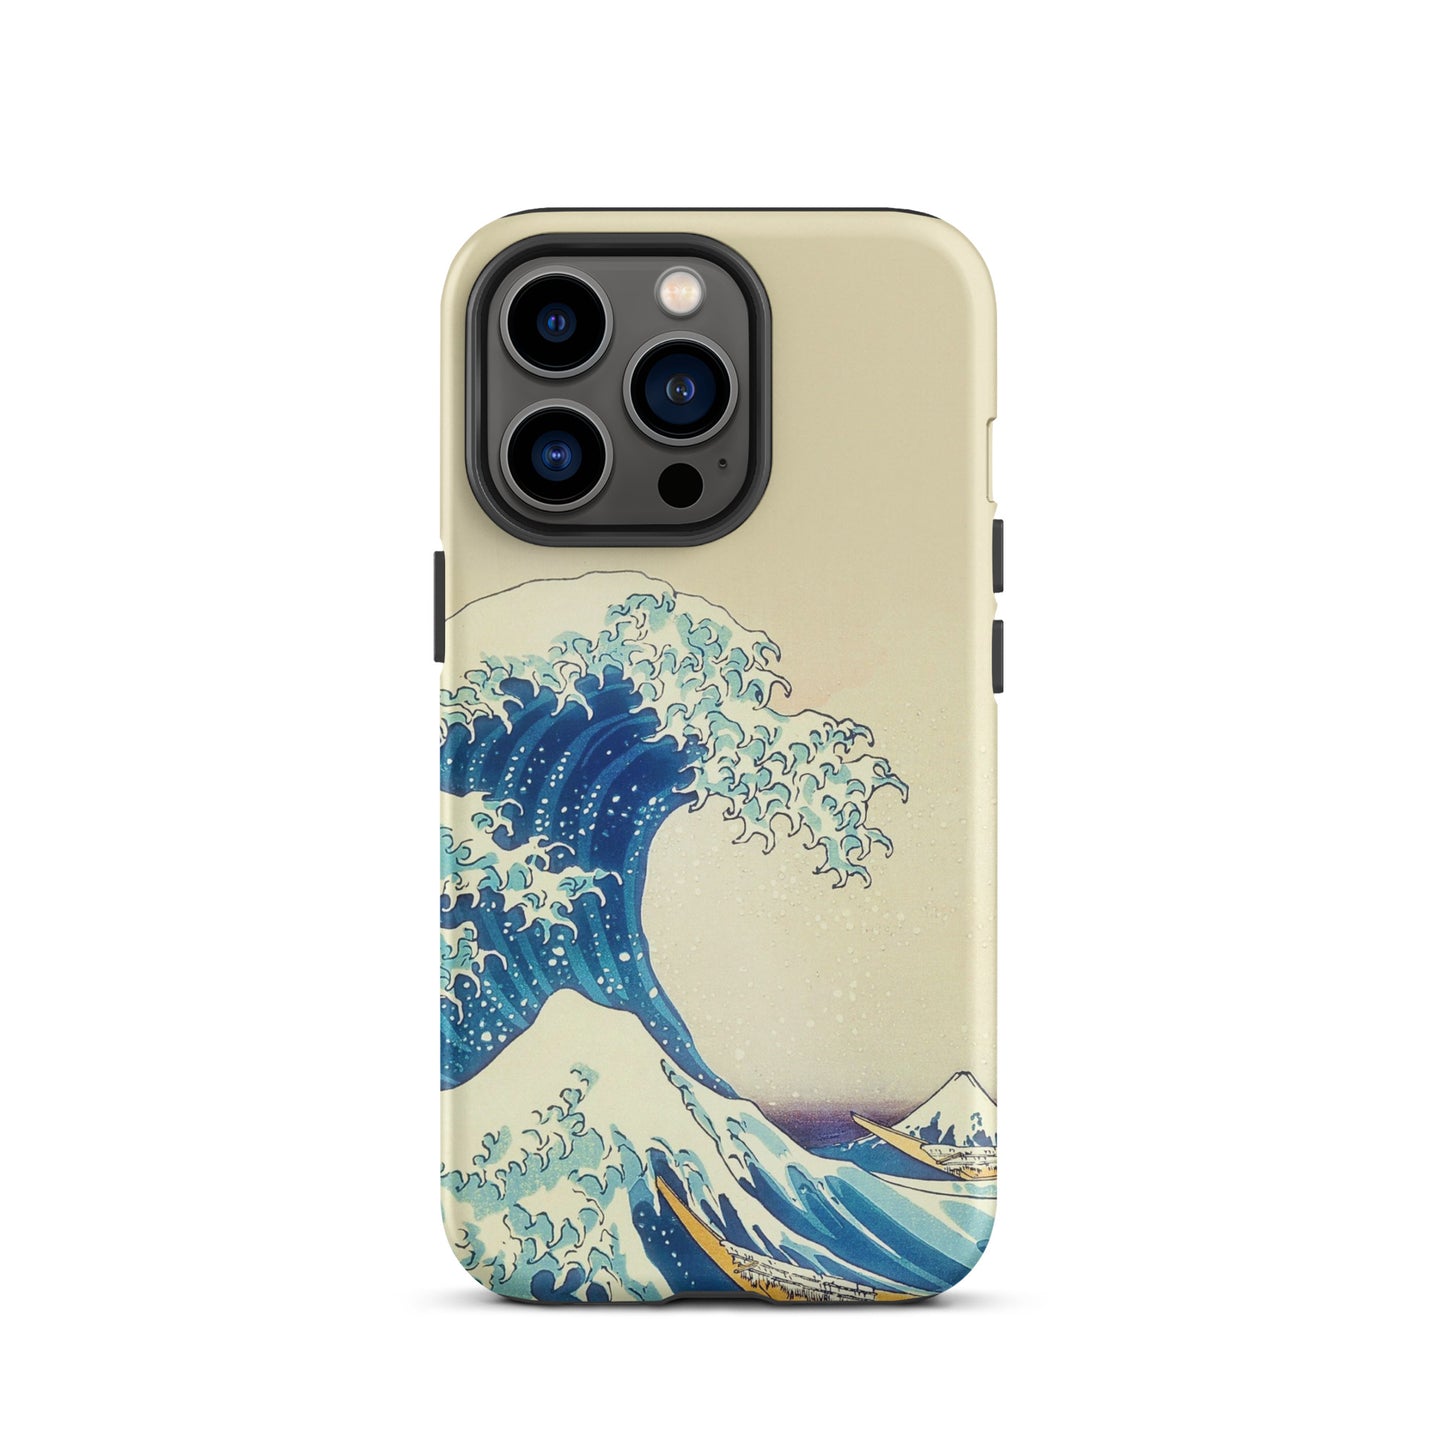 Waves iPhone case